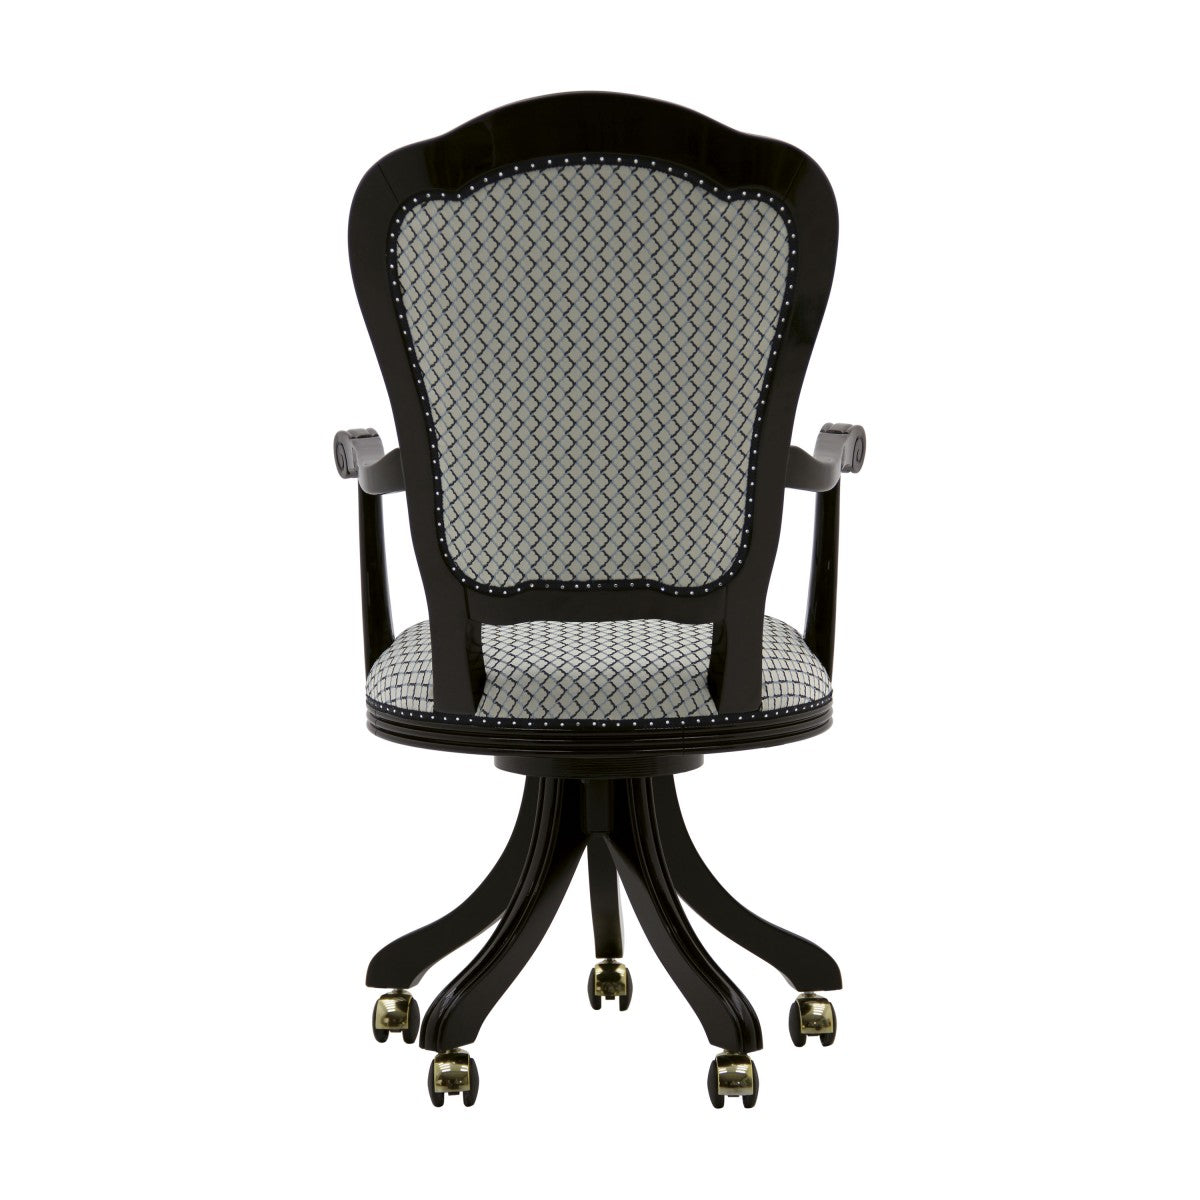 Flavia Bespoke Upholstered Luxury Executive Swivel Office Desk Chair MS163P Custom Made To Order